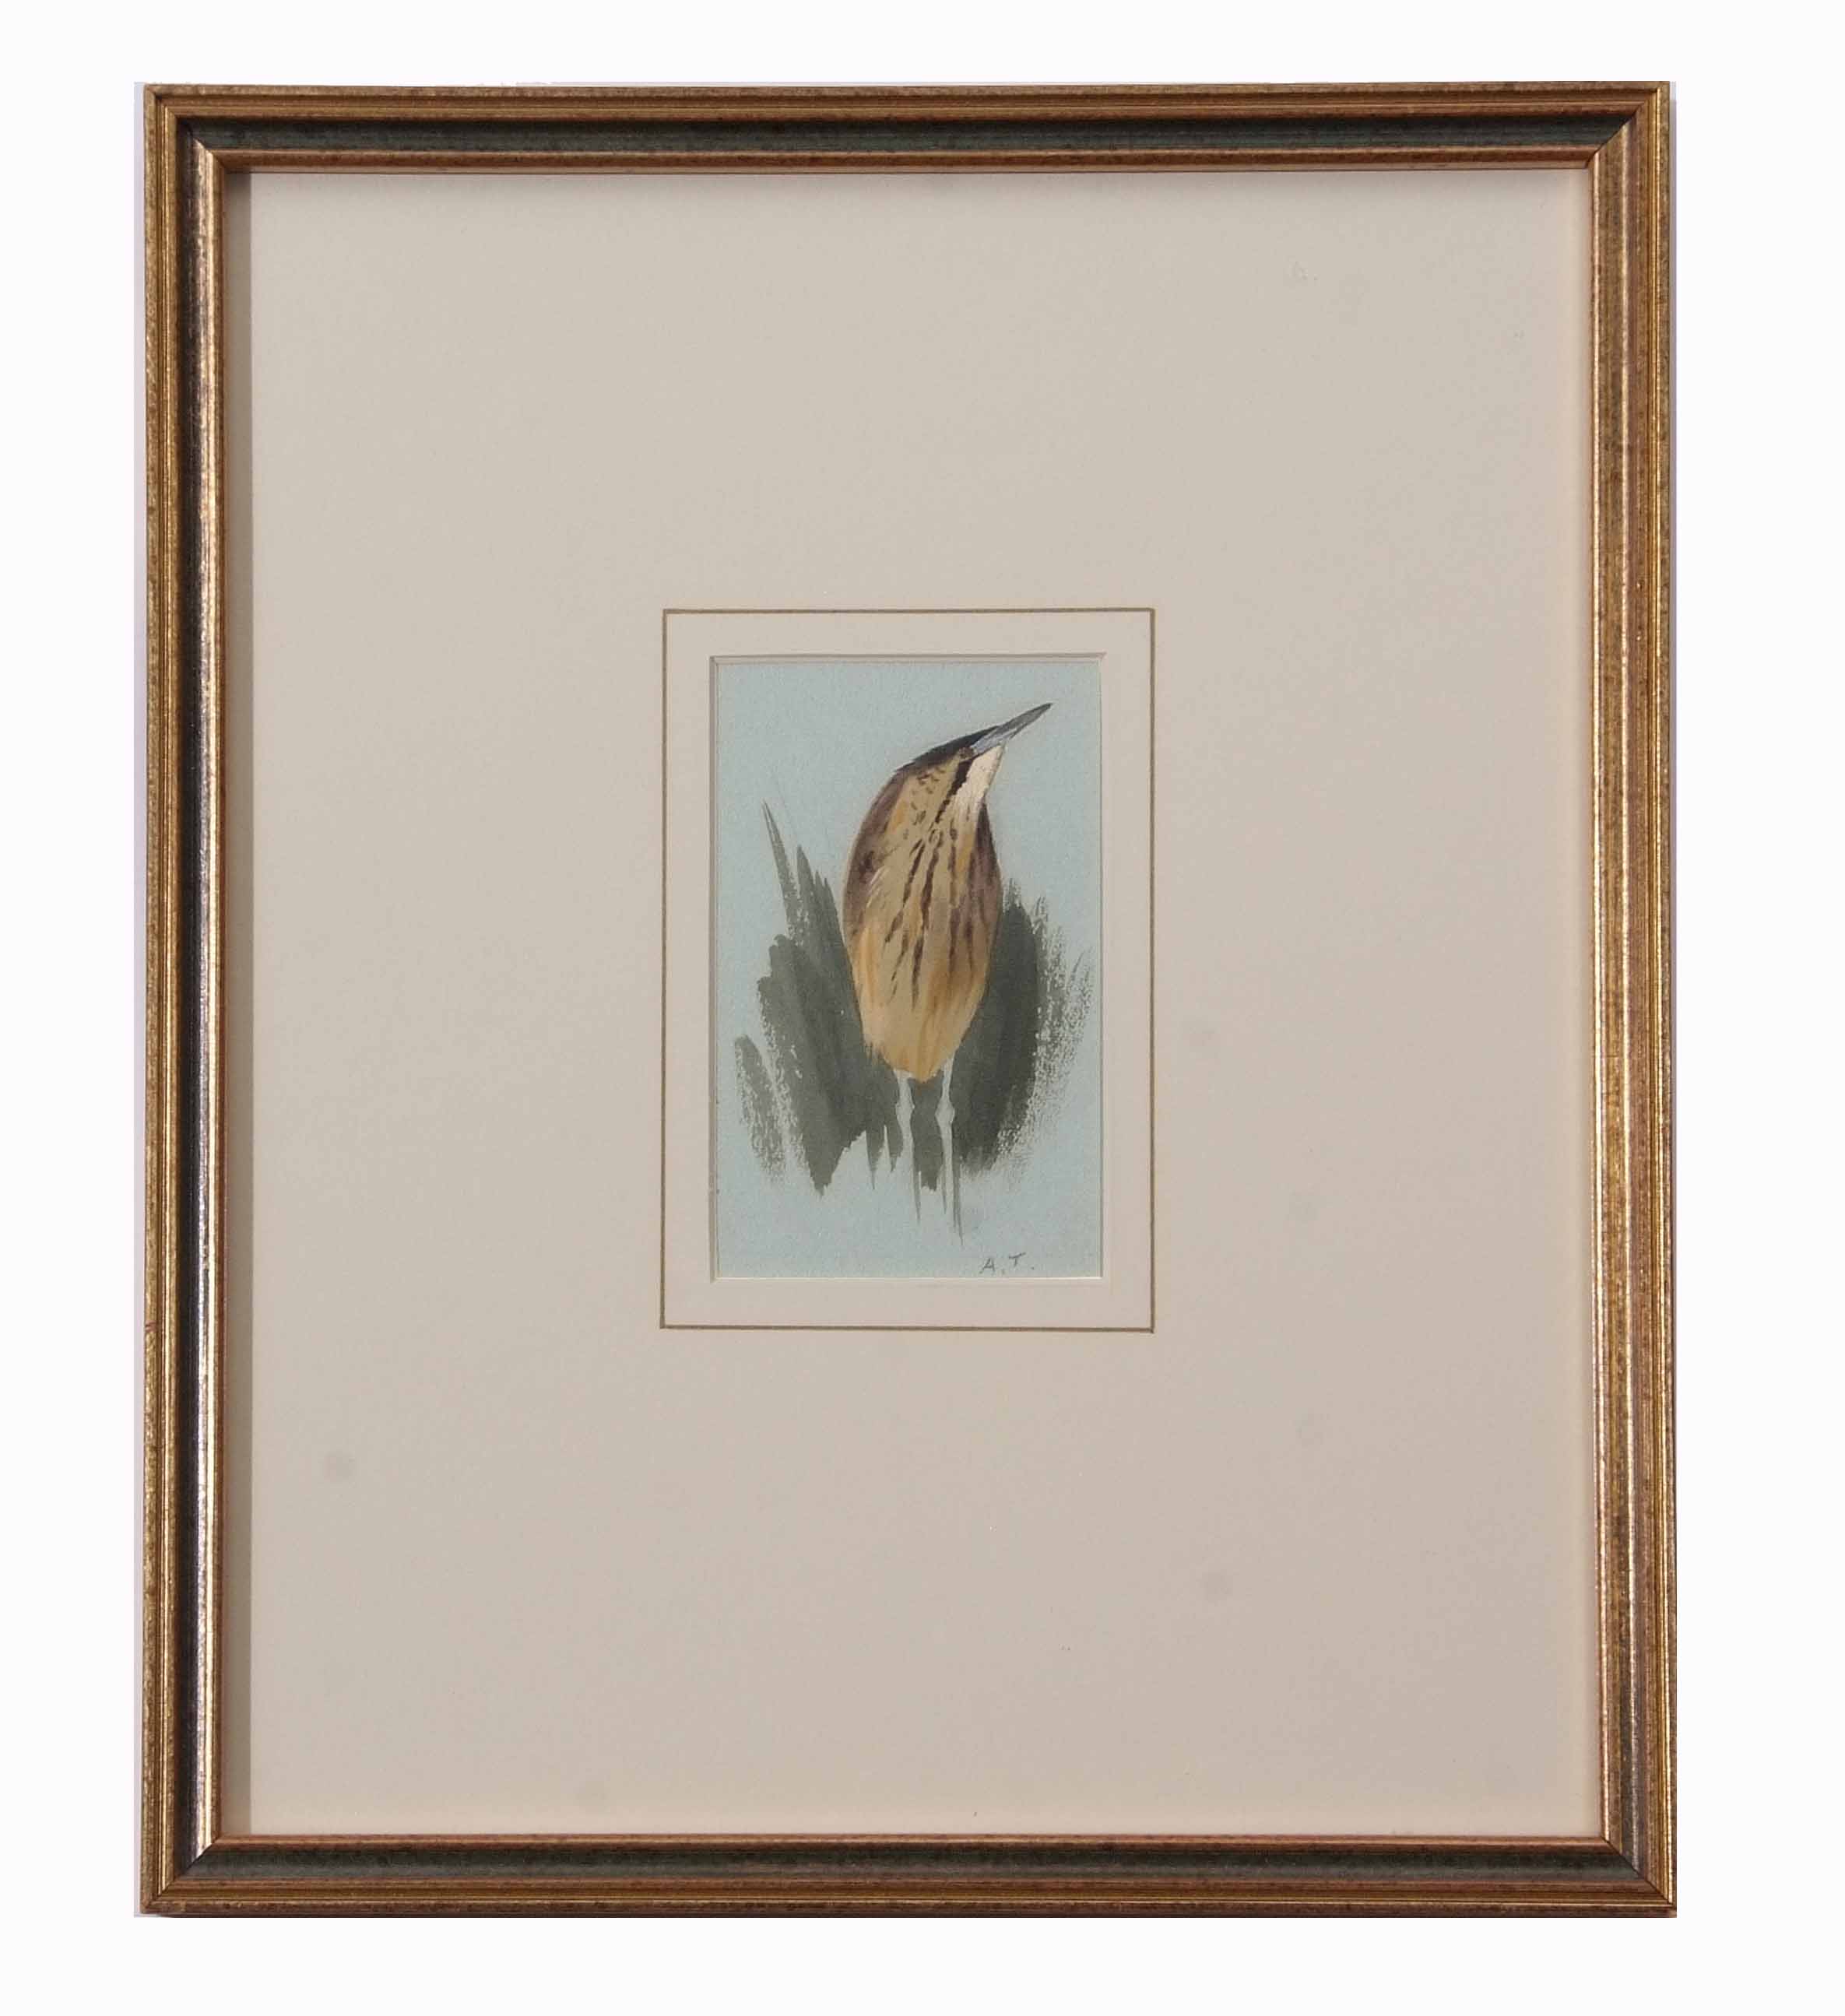 Archibald Thorburn (1860-1935) , Bittern , watercolour, initialled lower right, 11 x 7cm